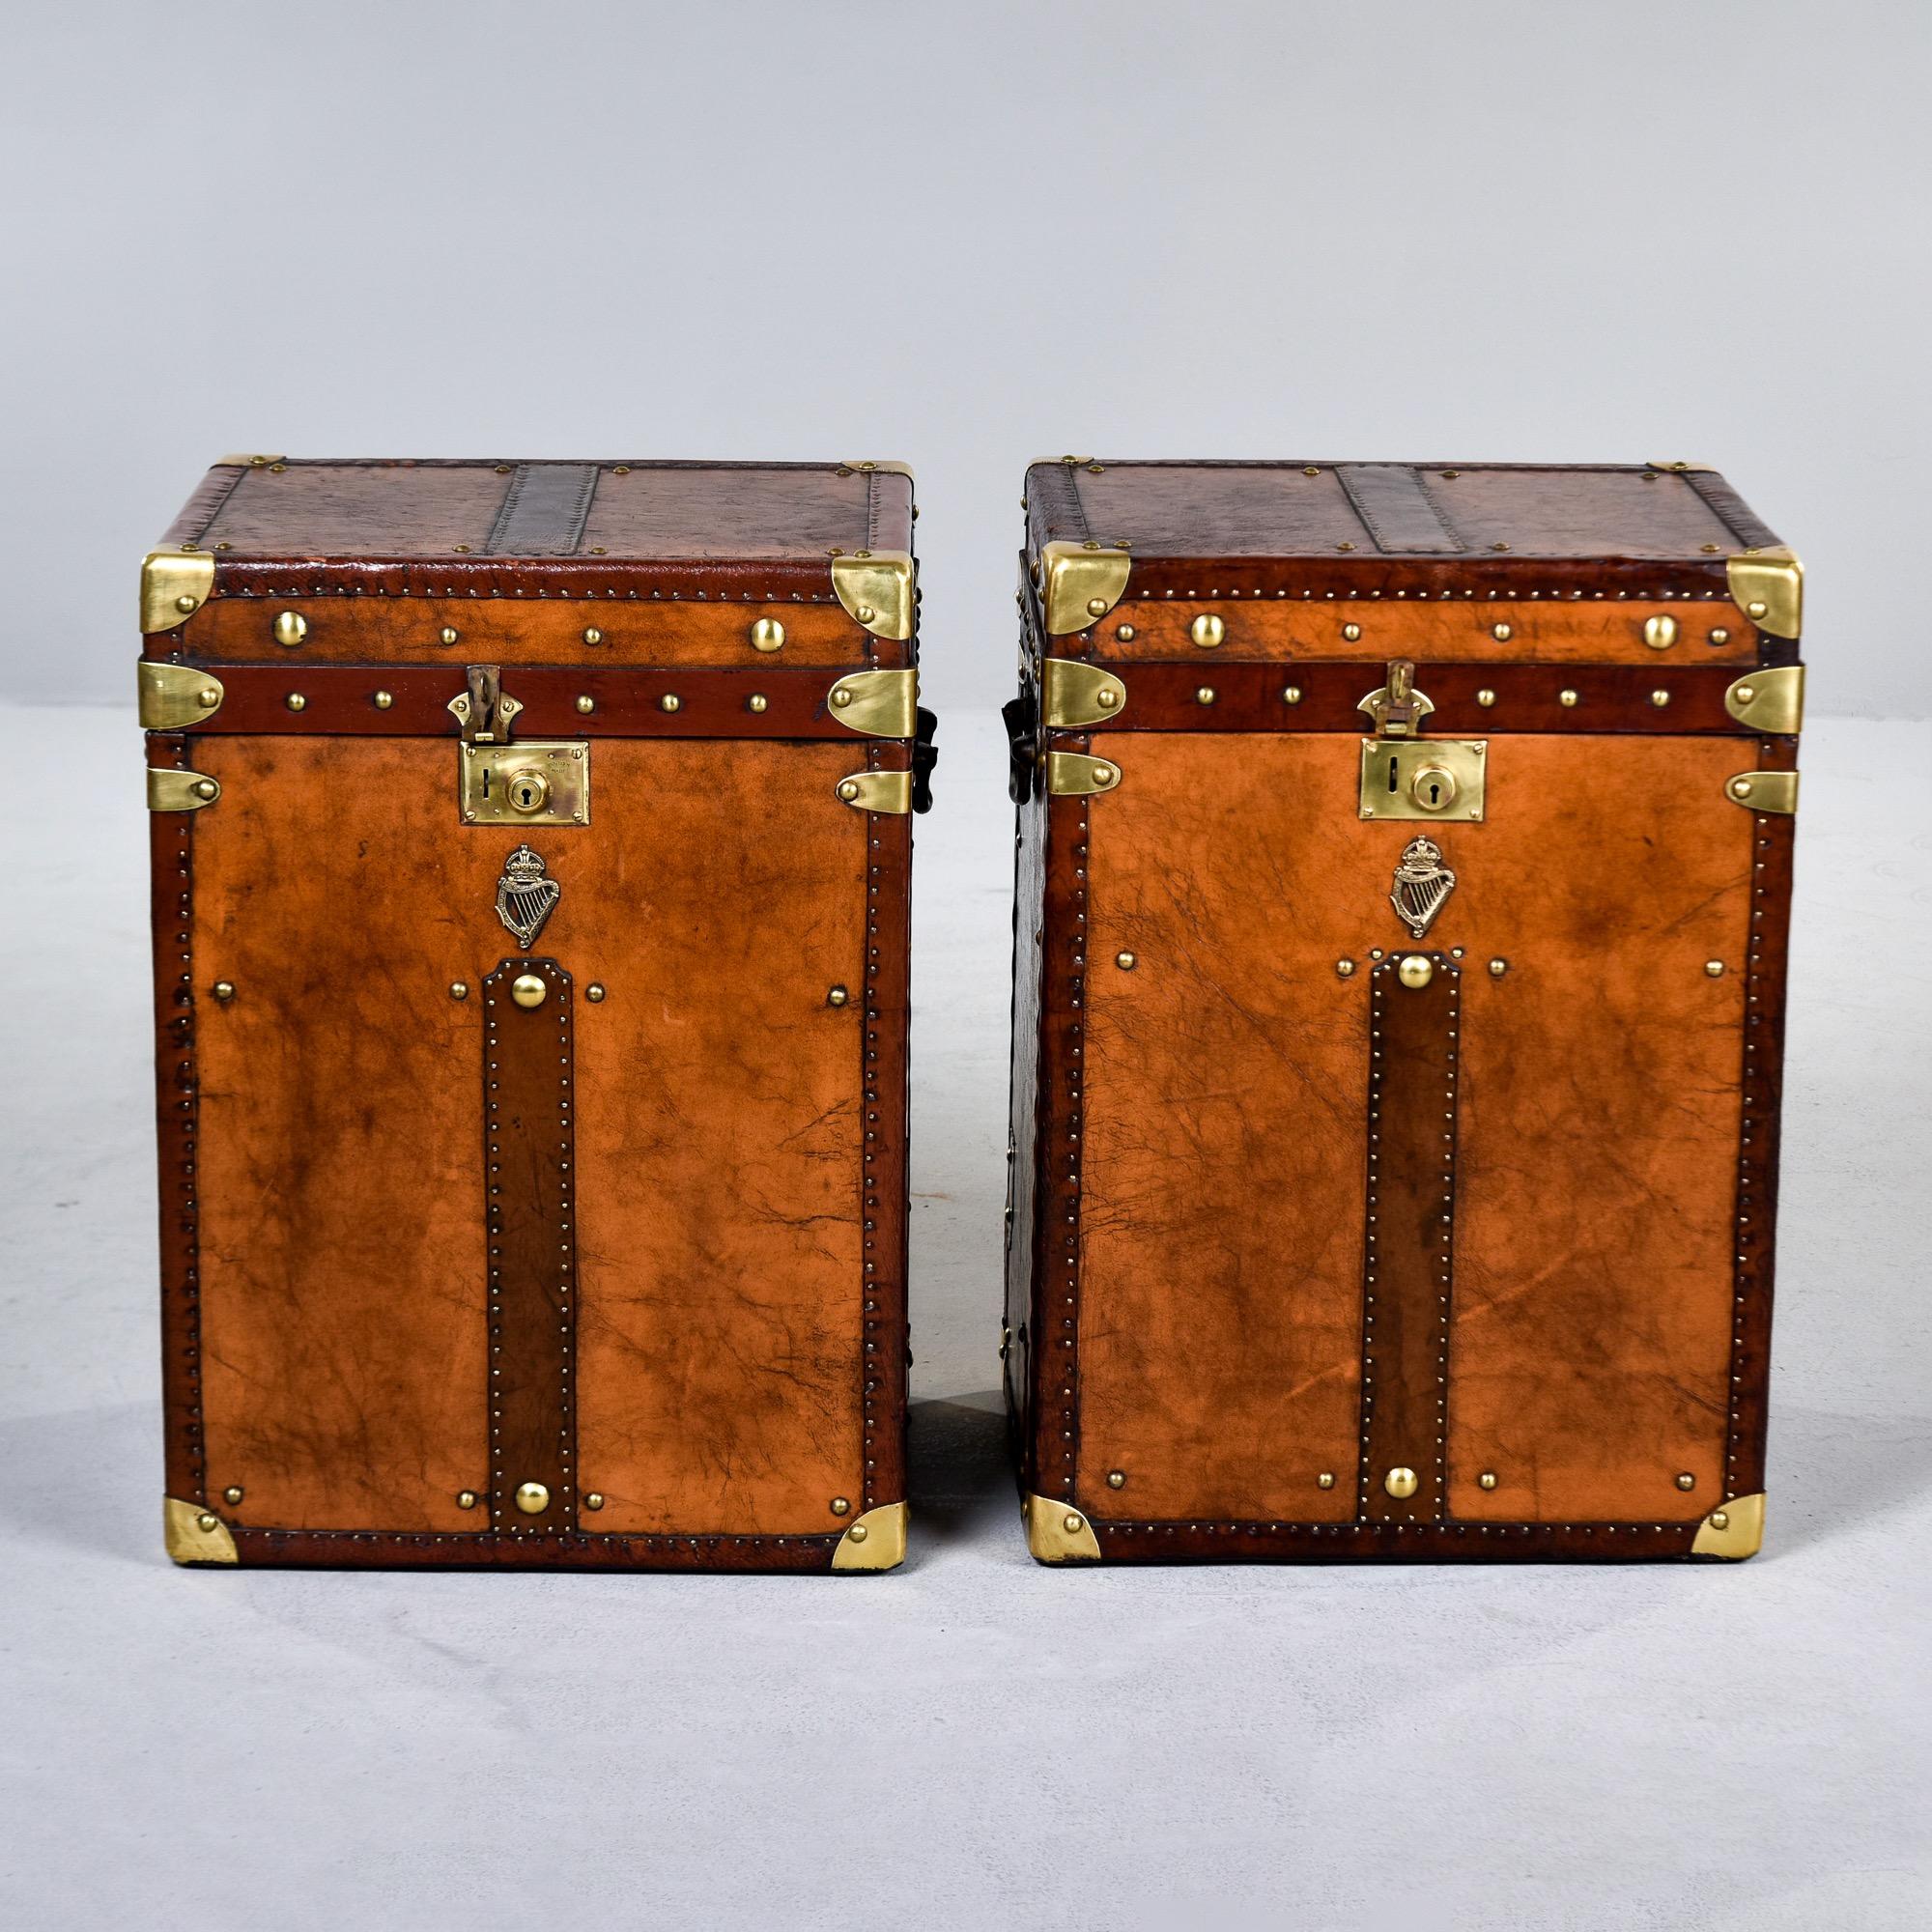 Circa 1920s pair of leather and brass covered trunks found in England. Both trunks have been fully restored with patched leather, new blue velour fabric interior, polished brass hardware and brass regimental emblems. These make great end or side